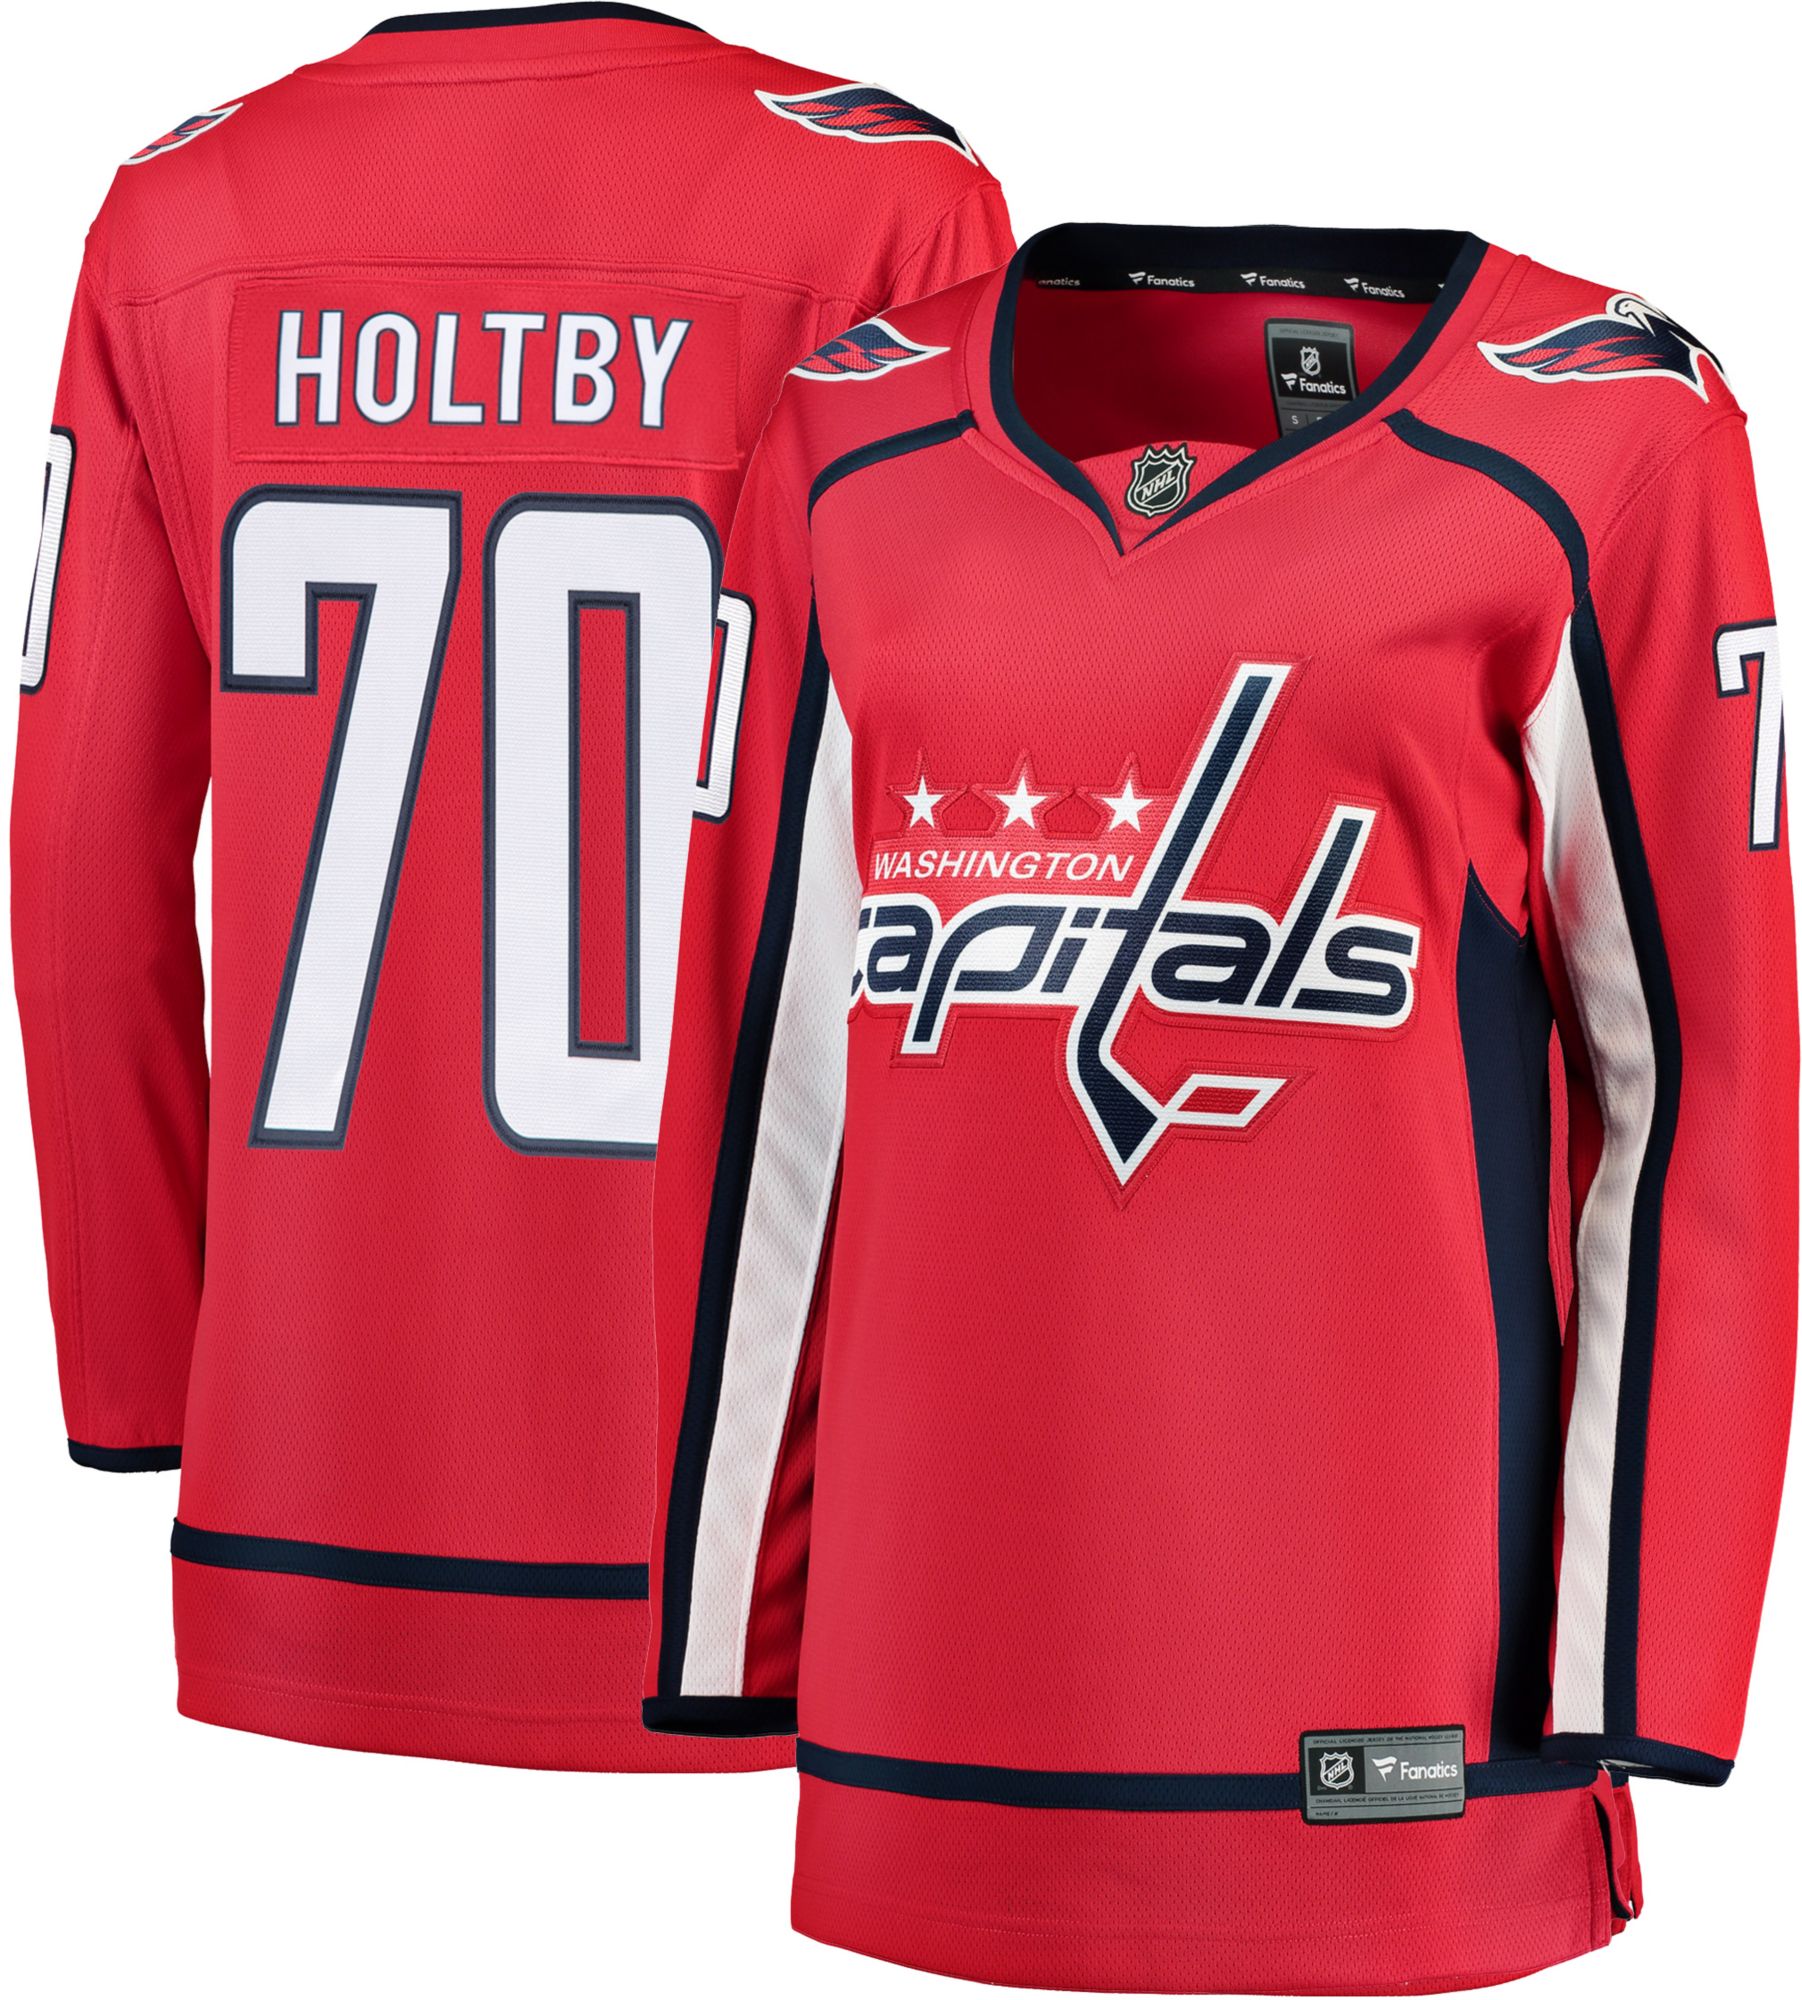 holtby jersey number